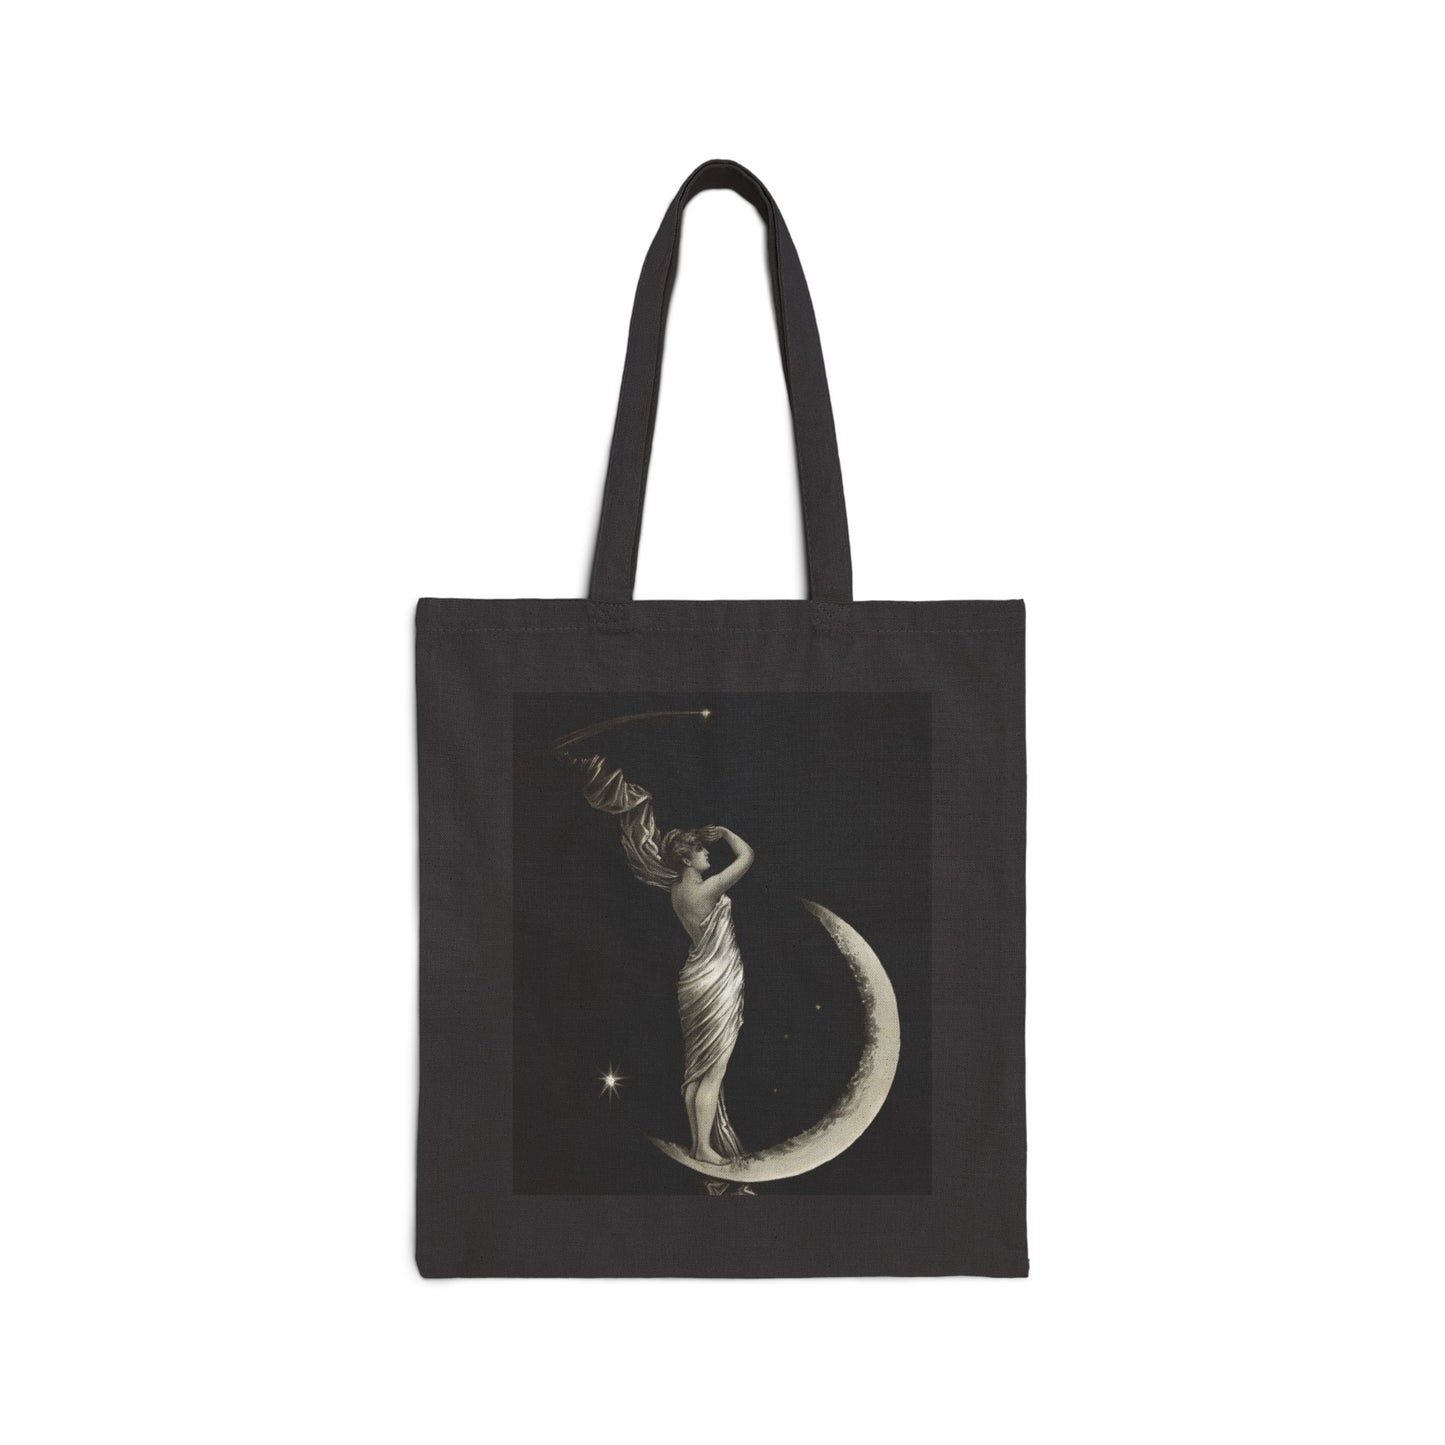 The universal favorite Canvas Tote Bag